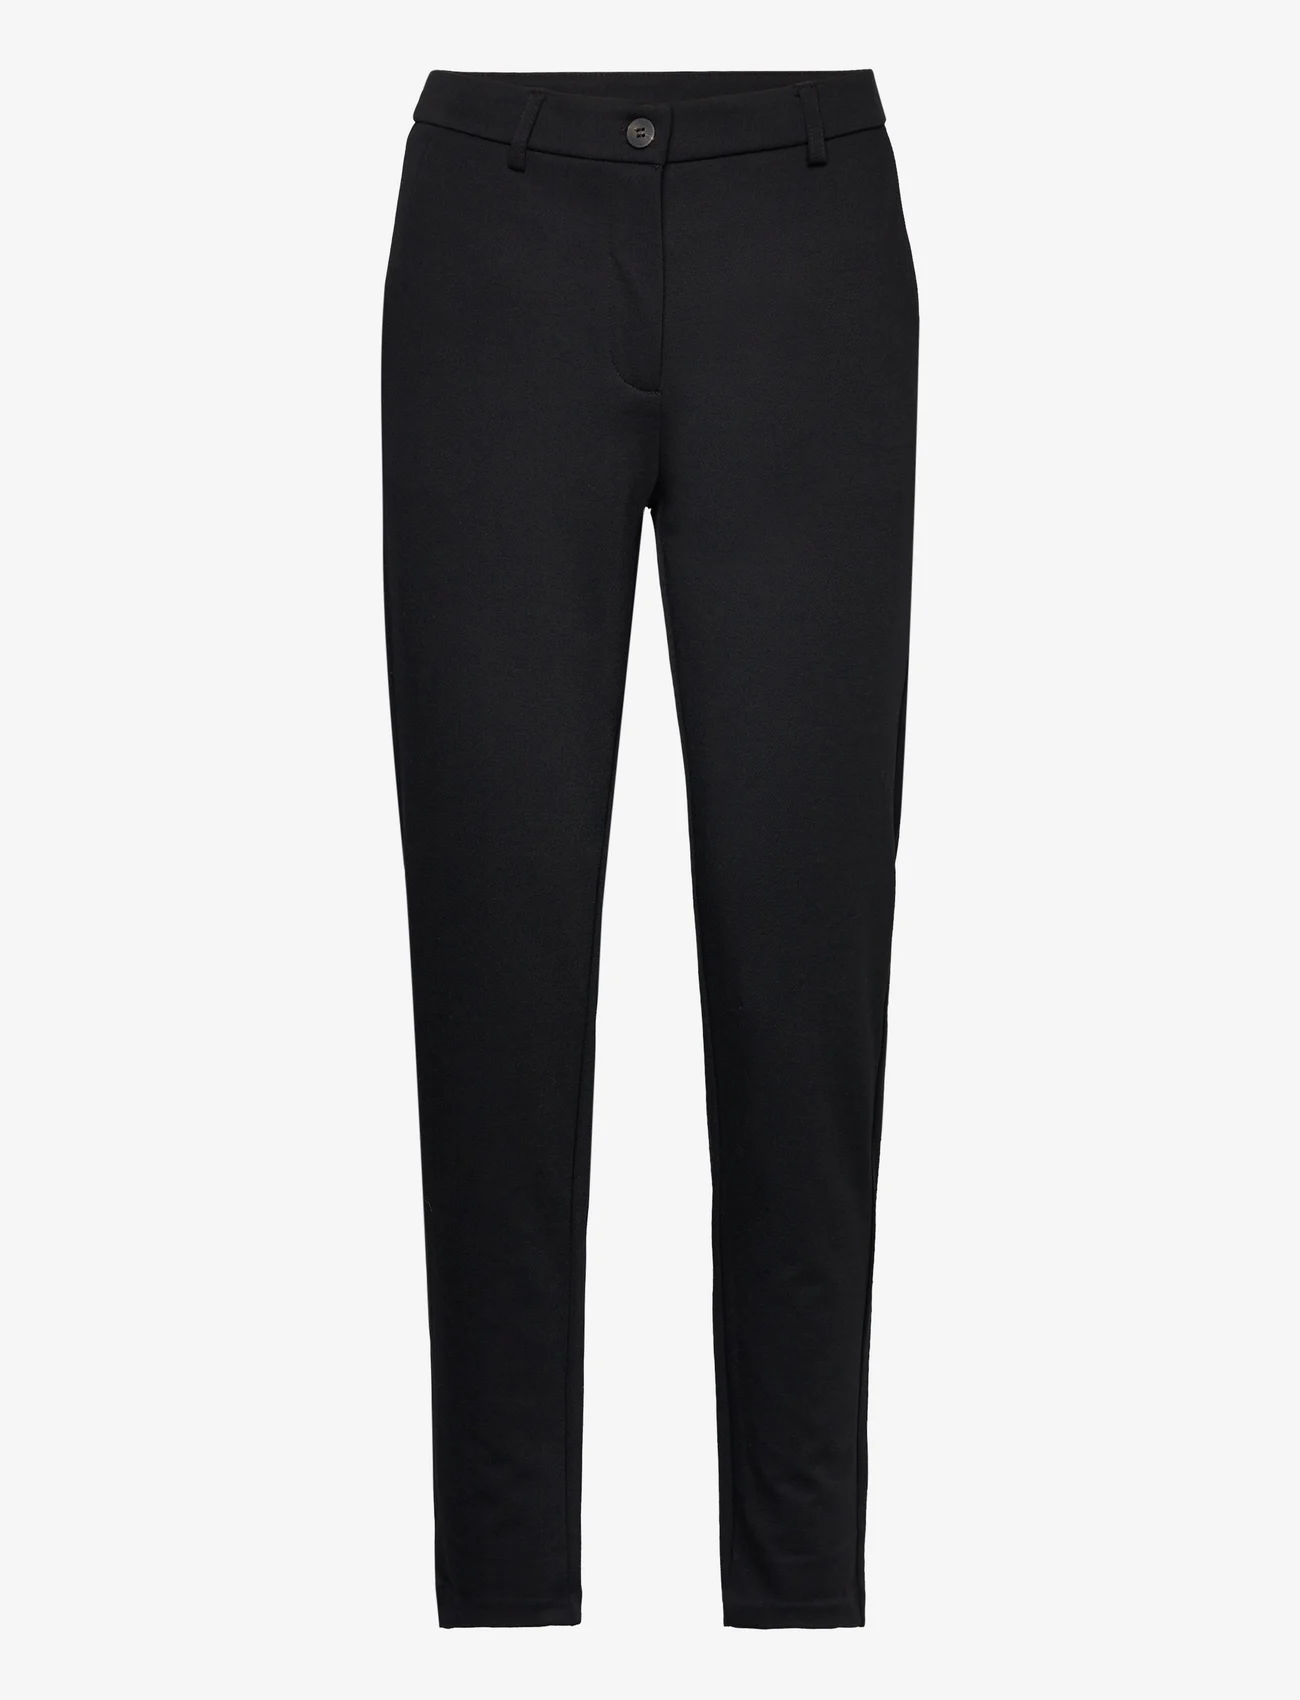 FREE/QUENT - FQNANNI-PANT - formell - black - 0